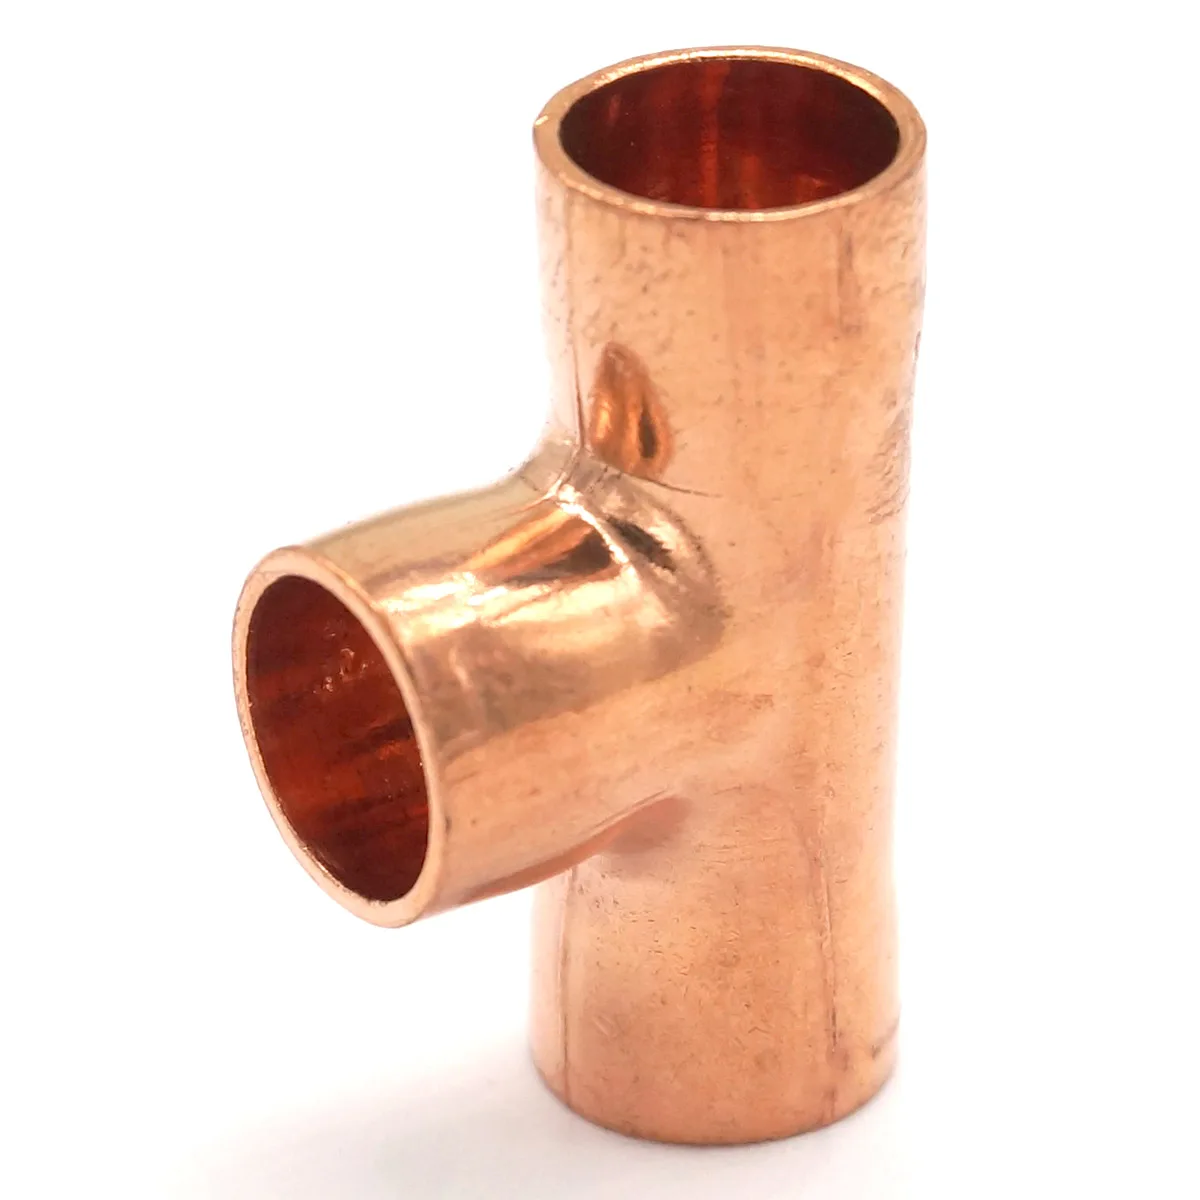 COPPER END FEED END FITTING TEE 8MM-108MM PIPE FITTINGS/PLUMBING/COPPER PIPE 